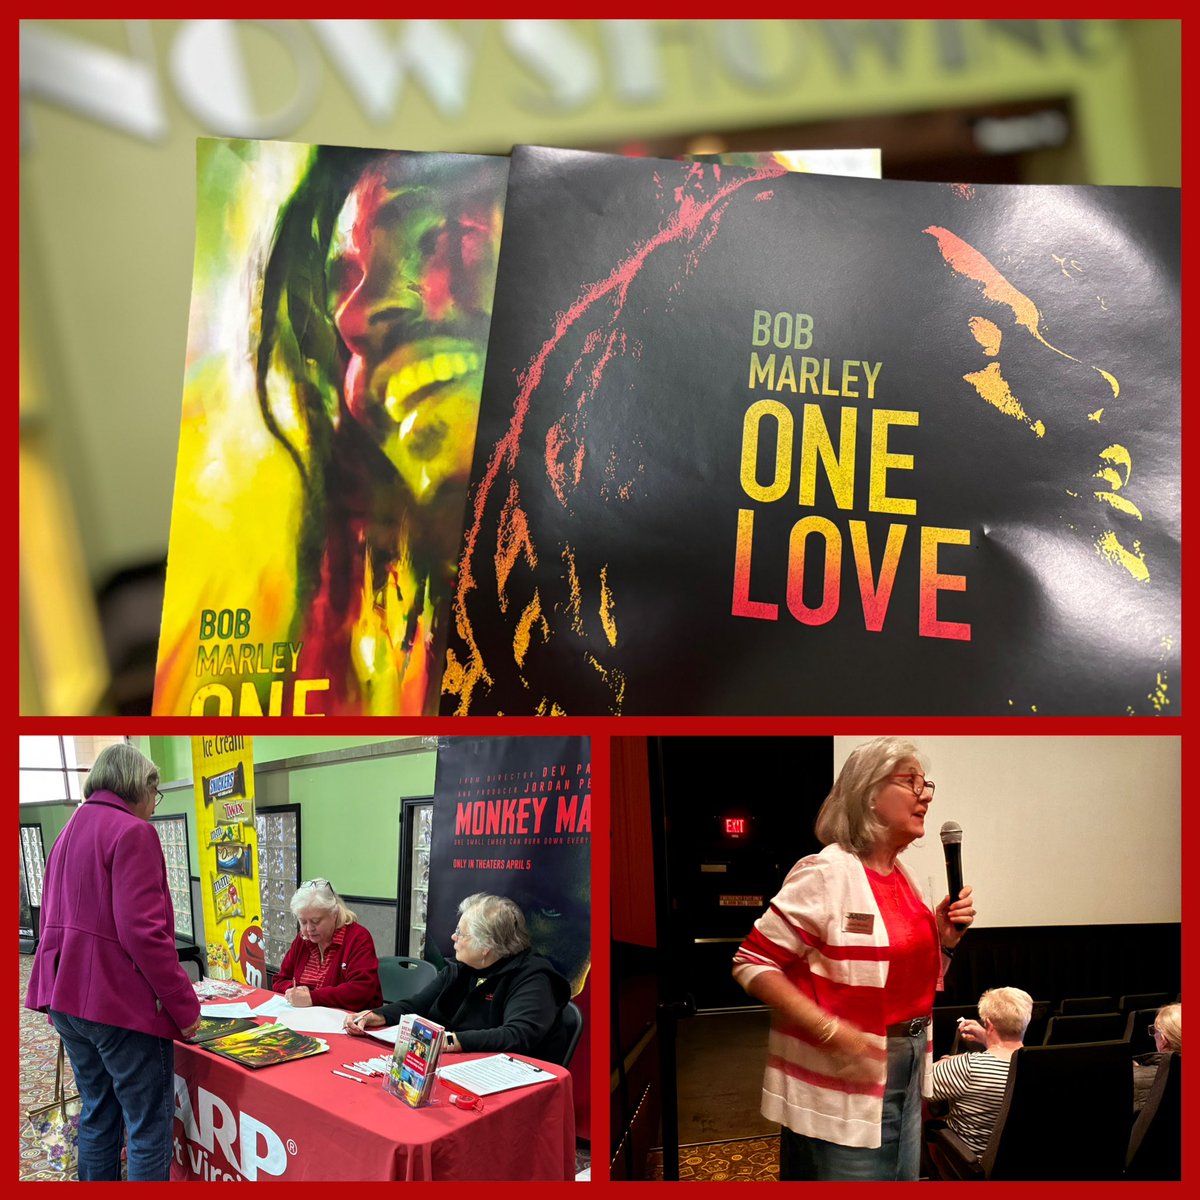 Thanks to everyone who braved the wet weather to join us for today’s Movies For Grownups Kanawha Valley matinee screening of “Bob Marley: One Love” at @RegalMovies Nitro 🍿🎞️